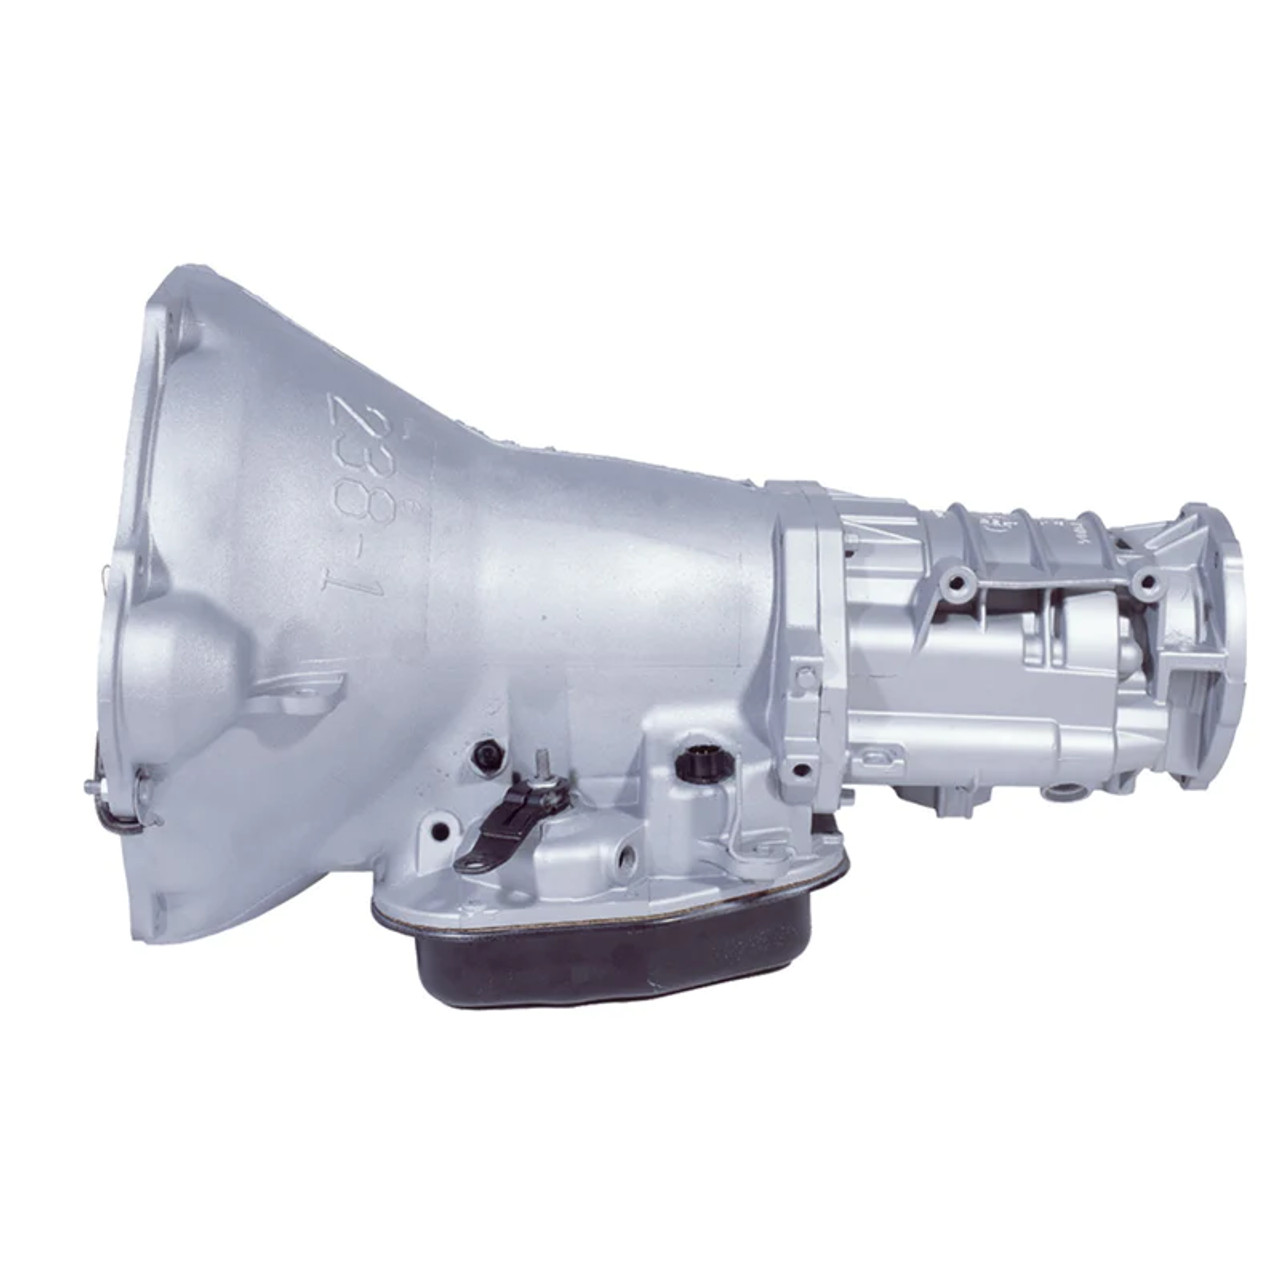 BD TRANSMISSION 518 4WD for 1991 to 1993 Dodge 5.9L Cummins (1030311F) Main View